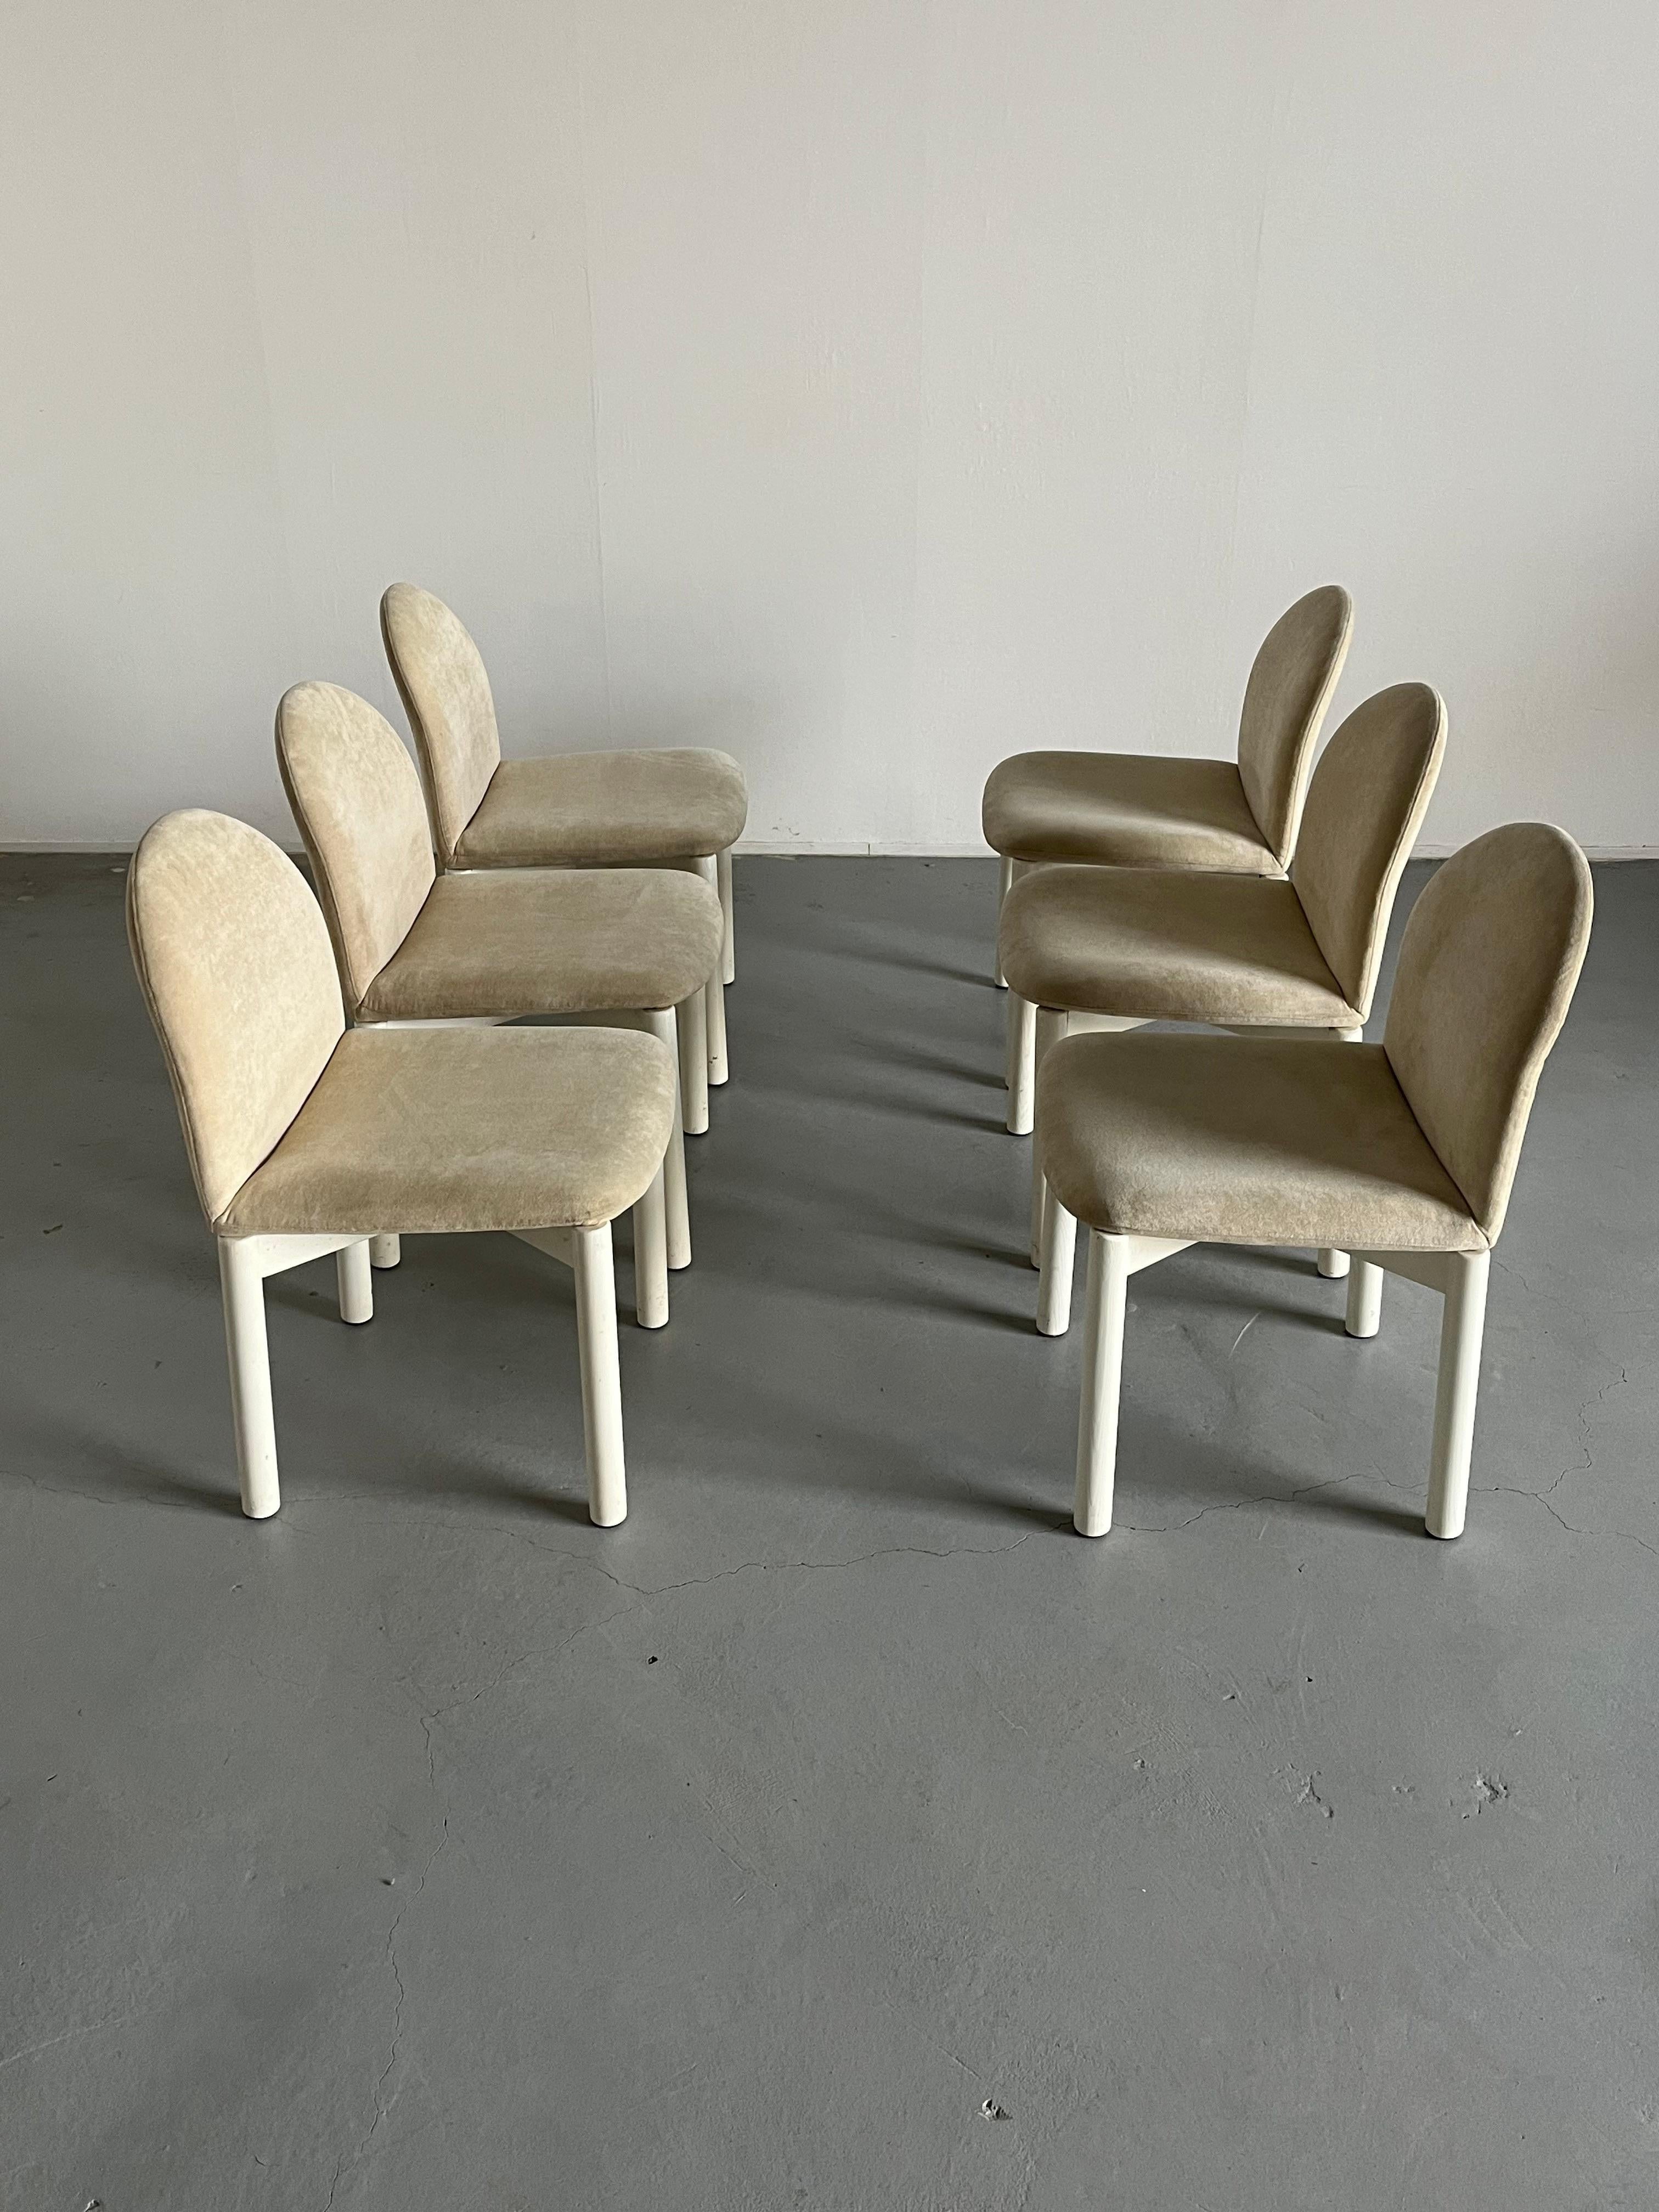 Set of 6 Mid-Century Modern 'Combra' Dining Chairs by Cor, 1980s Germany 3